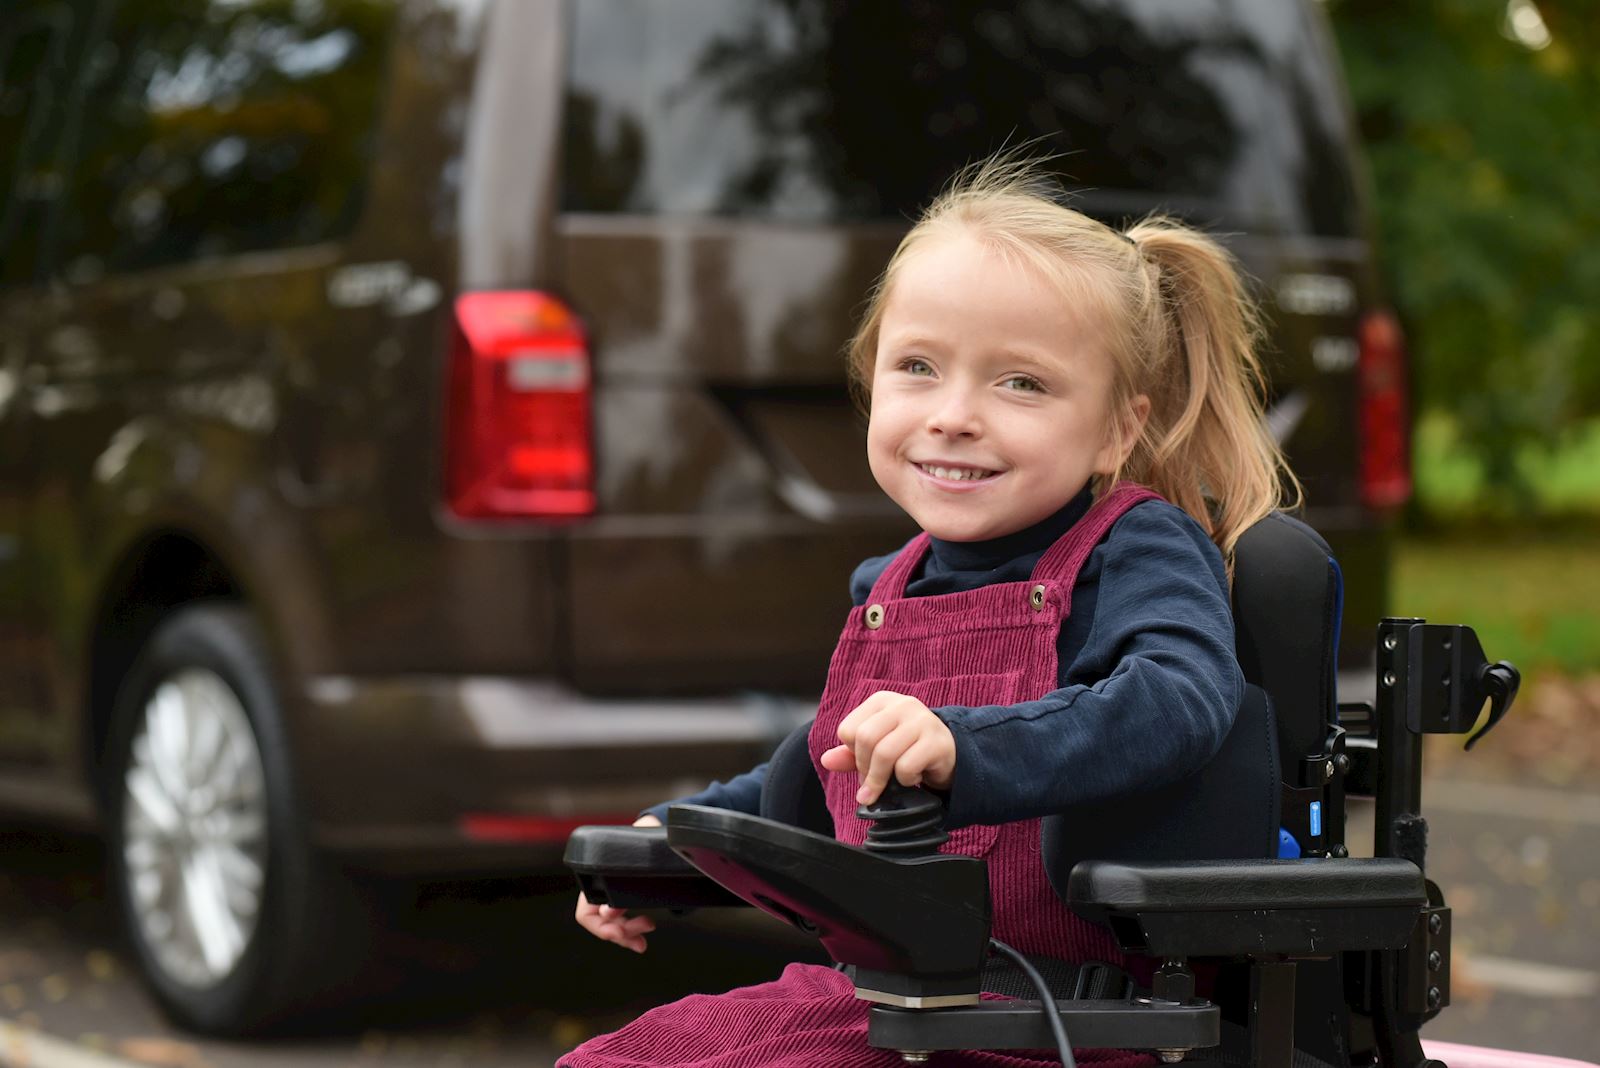 A little girl in a powered wheelchair, smiling, with a WAV in the background